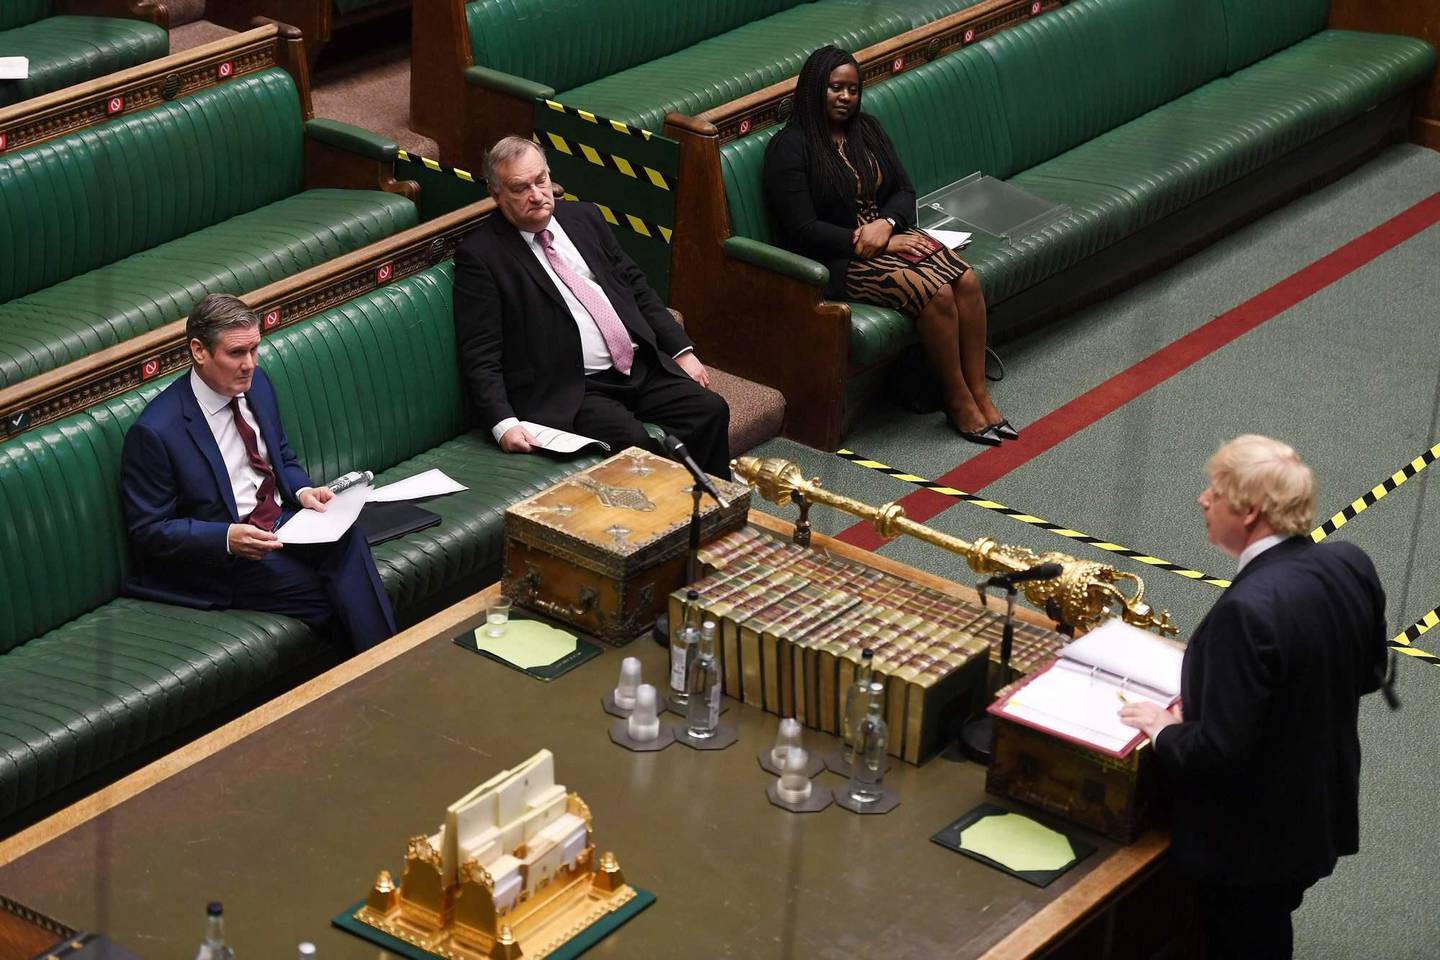 A handout photograph released by the UK Parliament shows shows Britain's main opposition Labour Party leader Keir Starmer (L) listening as Britain's Prime Minister Boris Johnson speaks at Prime Minister's Question time (PMQs) in the House of Commons in London on May 6, 2020, as parliament continues with social distancing measures in place, and some MPs taking part remotely by videolink, due to the novel coronavirus COVID-19 pandemic. - British Prime Minister Boris Johnson said Wednesday he could begin to ease a nationwide coronavirus lockdown next week, but warned he would do nothing that would risk a new surge of cases. He was speaking the day after Britain overtook Italy to become the worst-hit country in Europe, with more than 32,000 deaths related to COVID-19 -- behind only the United States in the global rankings. (Photo by JESSICA TAYLOR / various sources / AFP) / RESTRICTED TO EDITORIAL USE - NO USE FOR ENTERTAINMENT, SATIRICAL, ADVERTISING PURPOSES - MANDATORY CREDIT " AFP PHOTO / Jessica Taylor /UK Parliament"